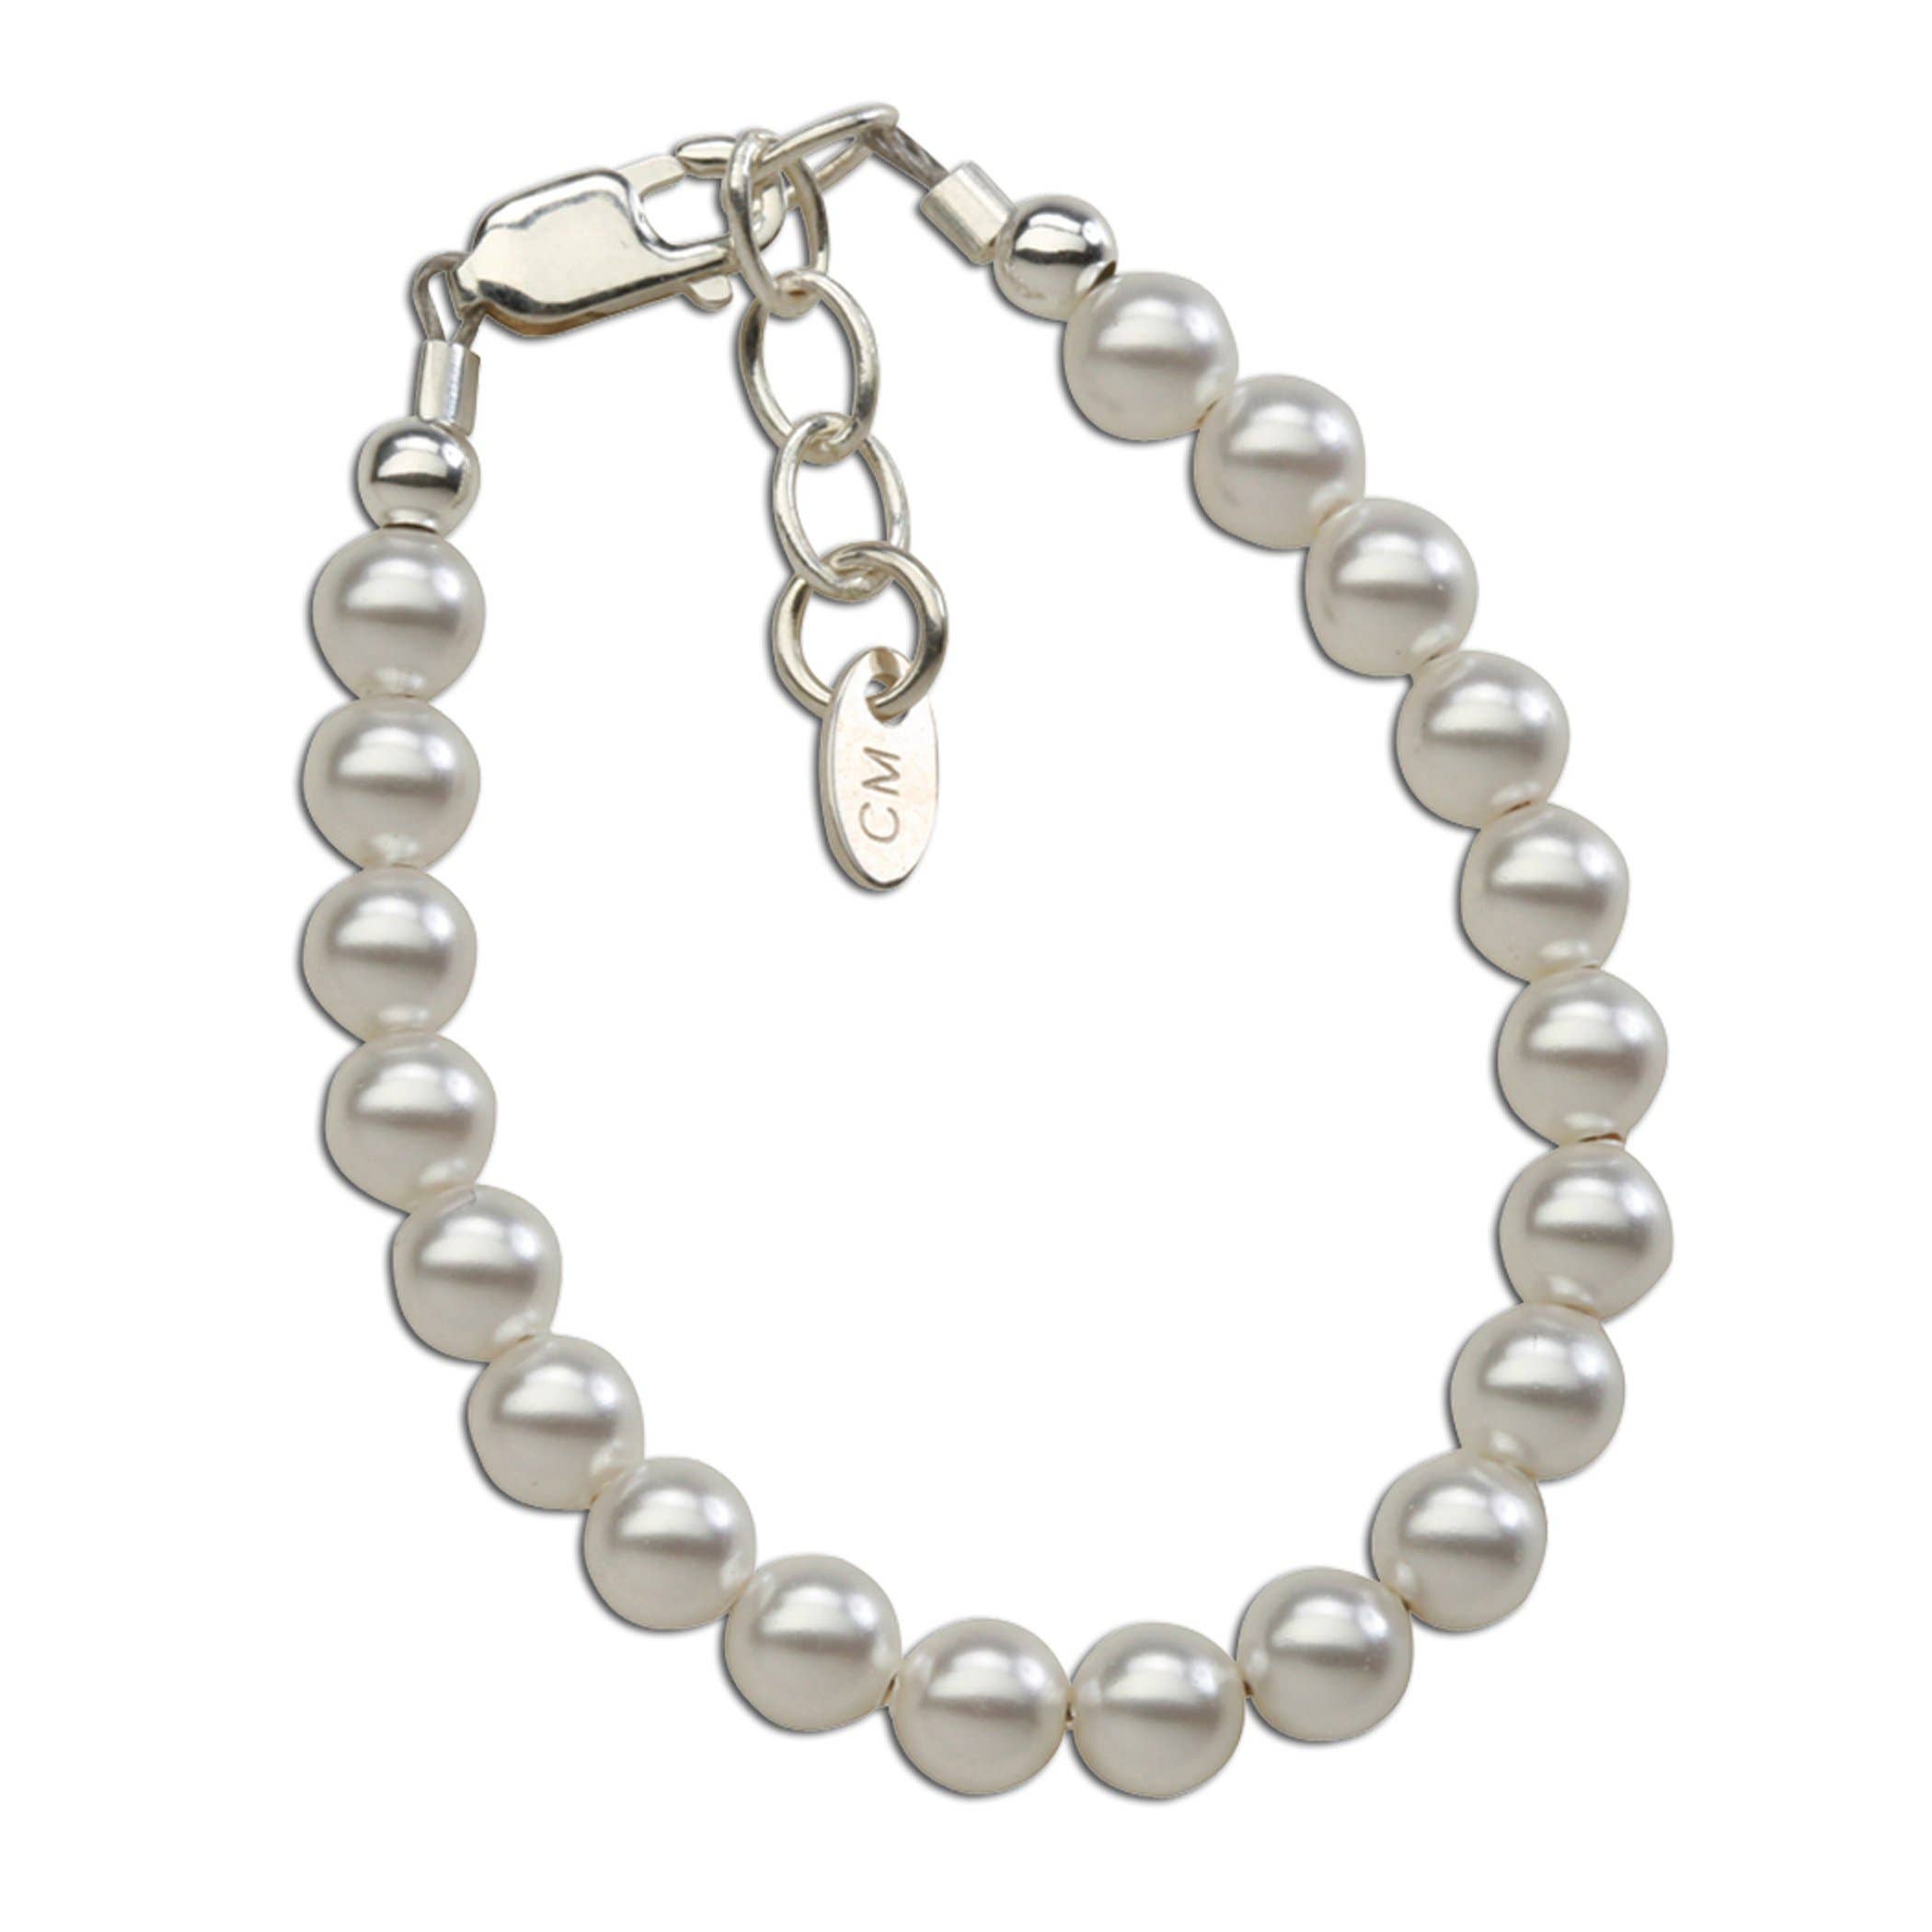 SERENITY STERLING SILVER PEARL BABY AND CHILD'S BRACELET